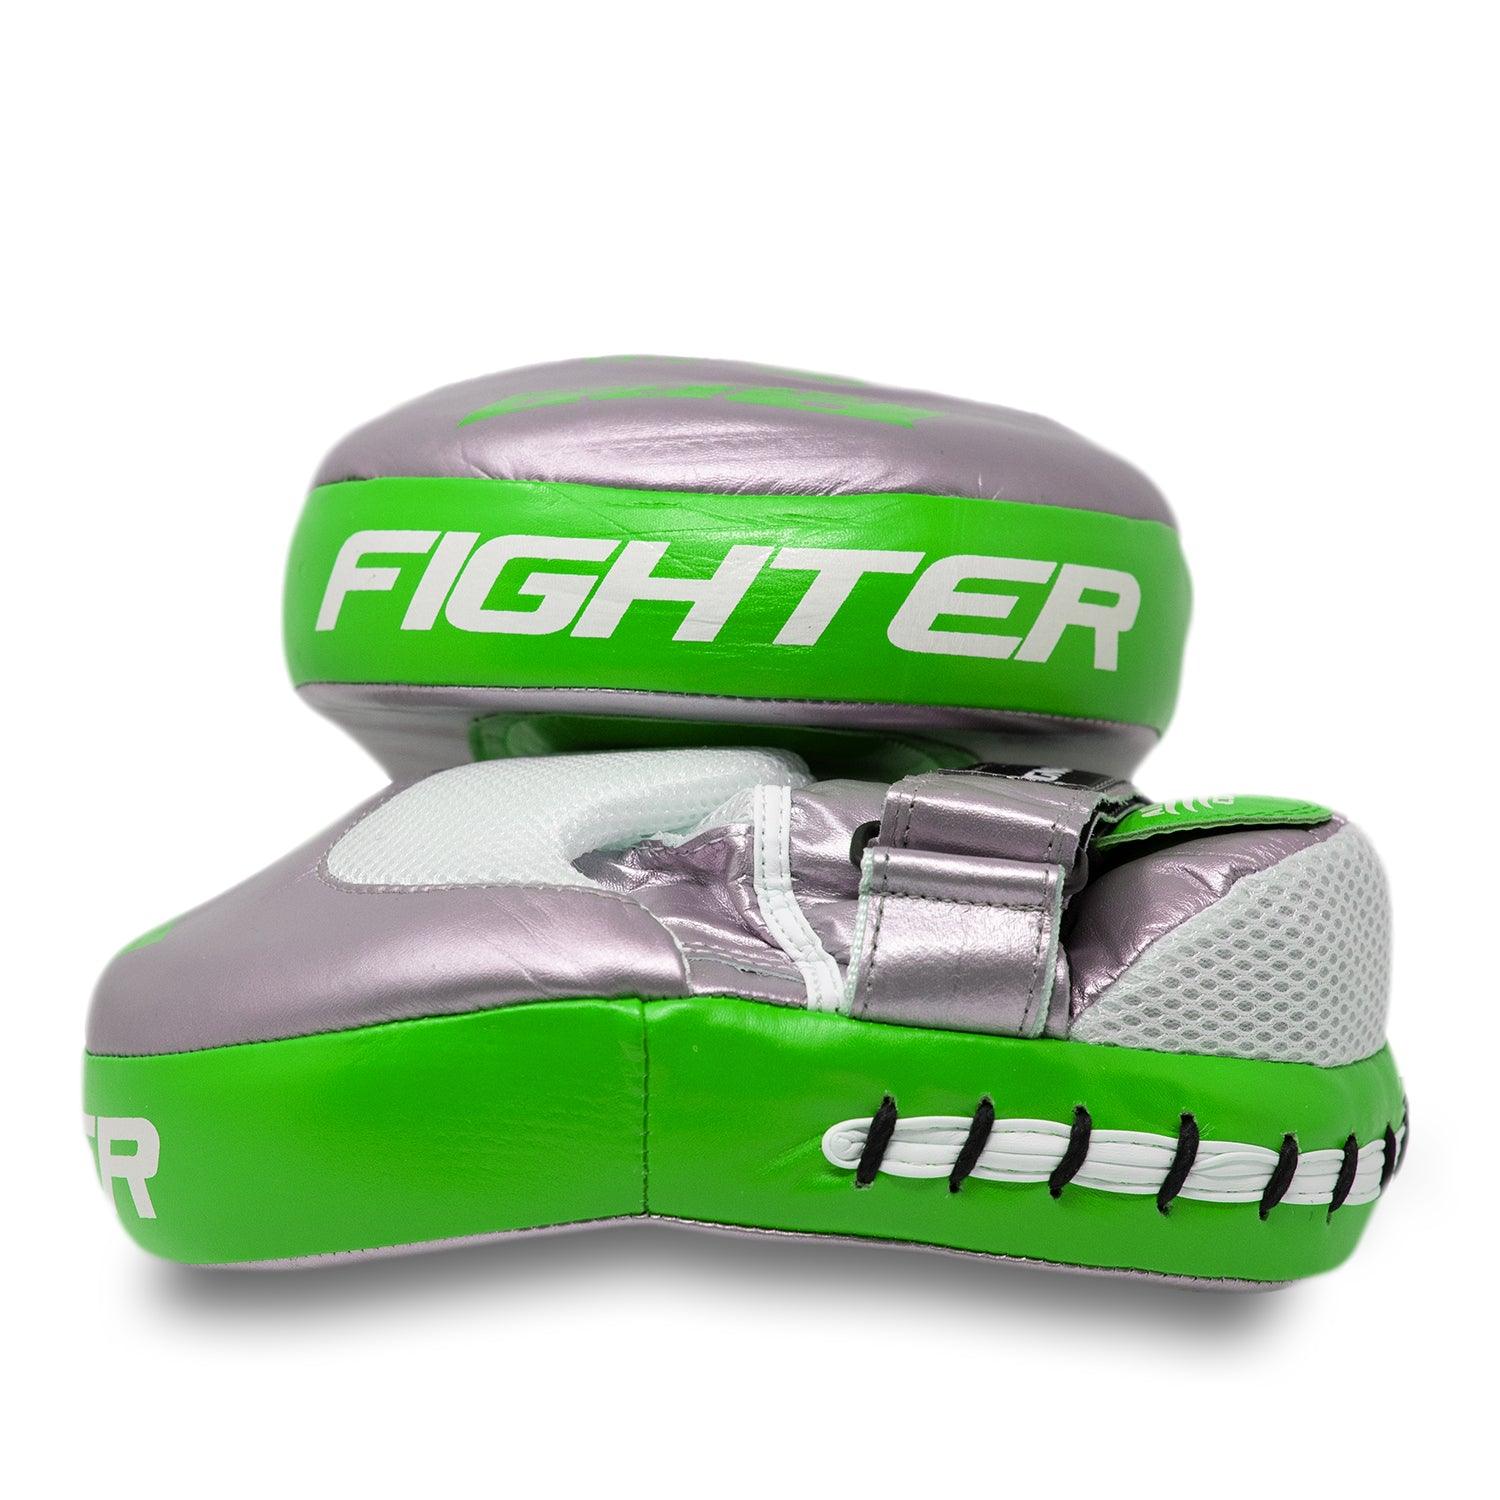 Hook and Jab Pads, boxing pads, punching pad, focus pads, kickboxing pads, focus pads boxing, boxing pad price, focus mitts, sparring pads, boxing gloves and pads, Ringmaster Sports Boxing Equipment, Ringmaster Sports Boxing pads, Focus pads Genuine Leather PGL 3.0 Series Green and Silver